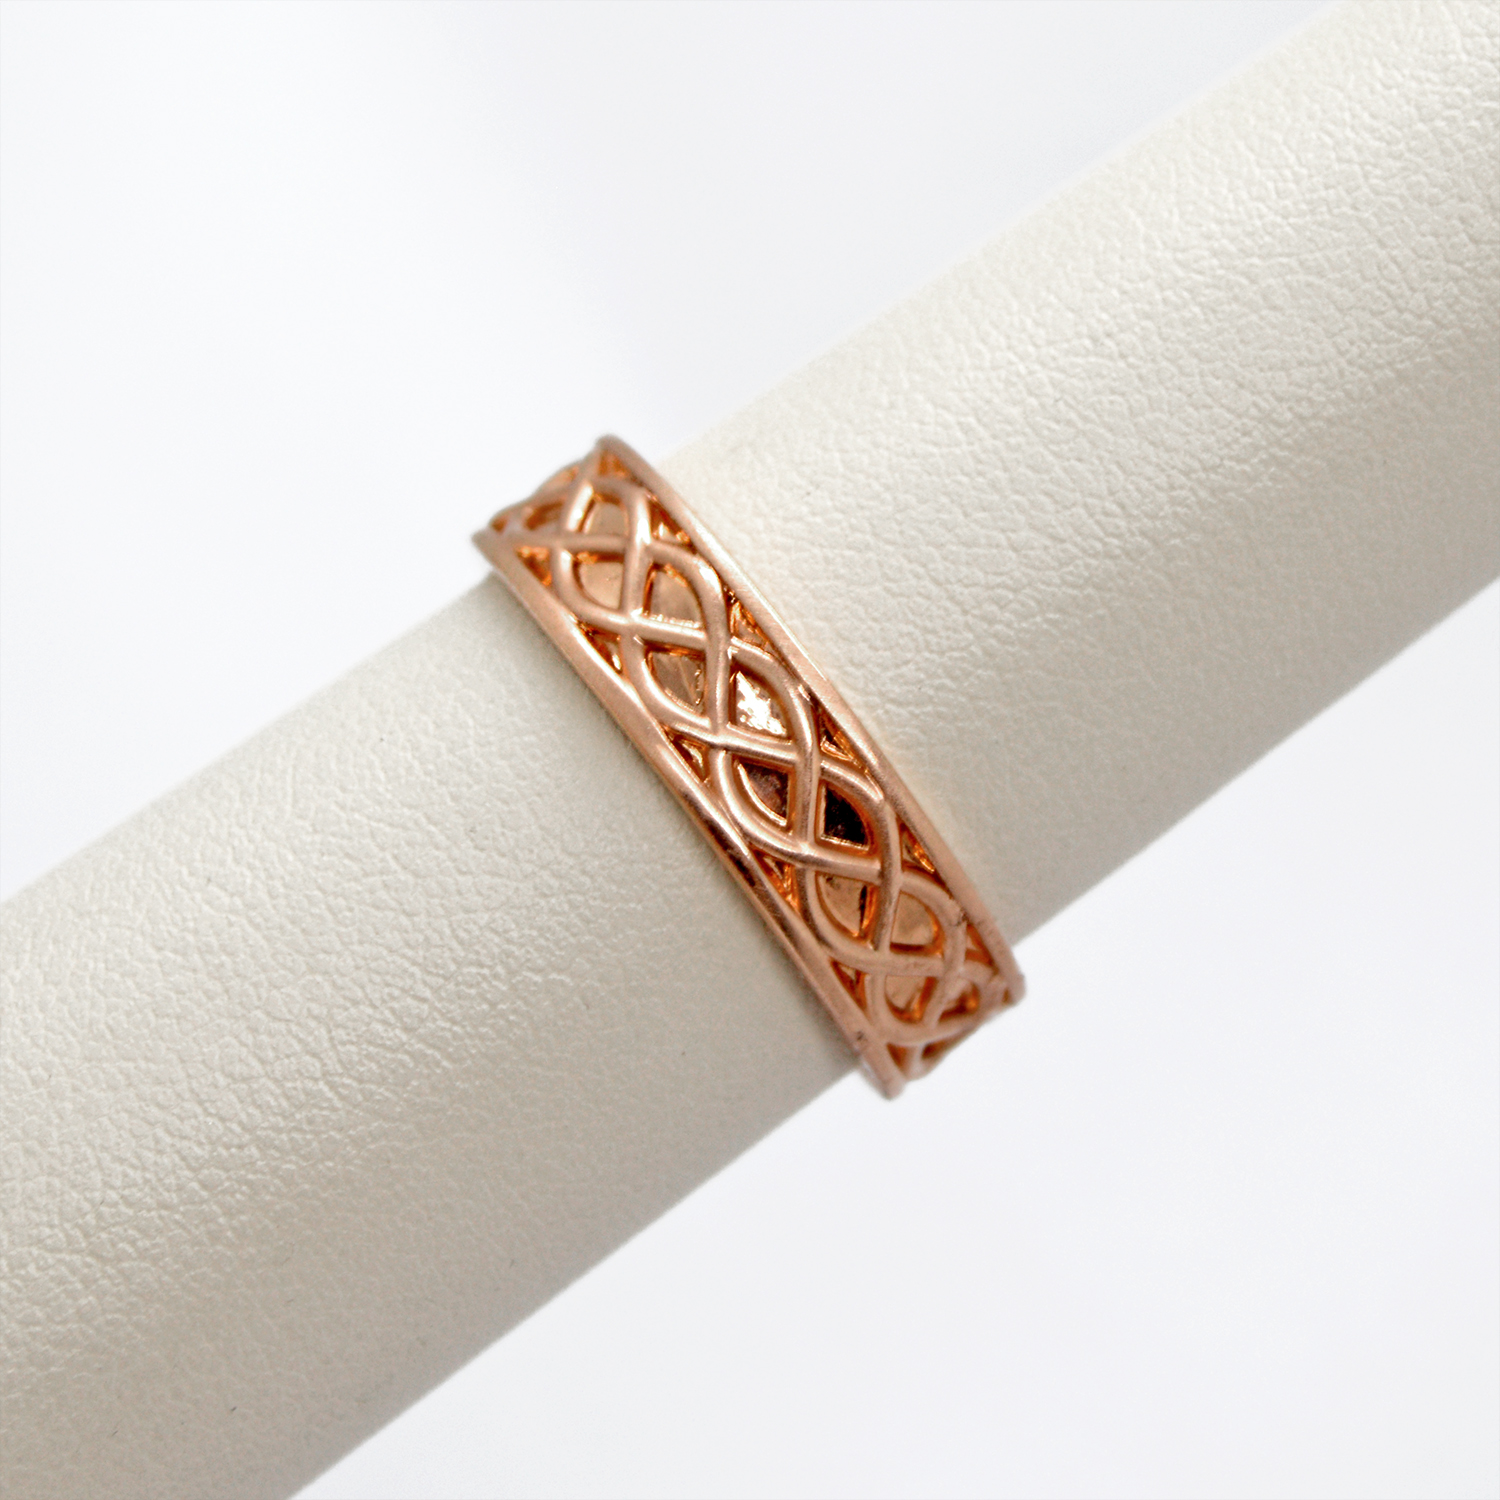 Celtic inspired mens wedding band in 14k rose gold with a braided design